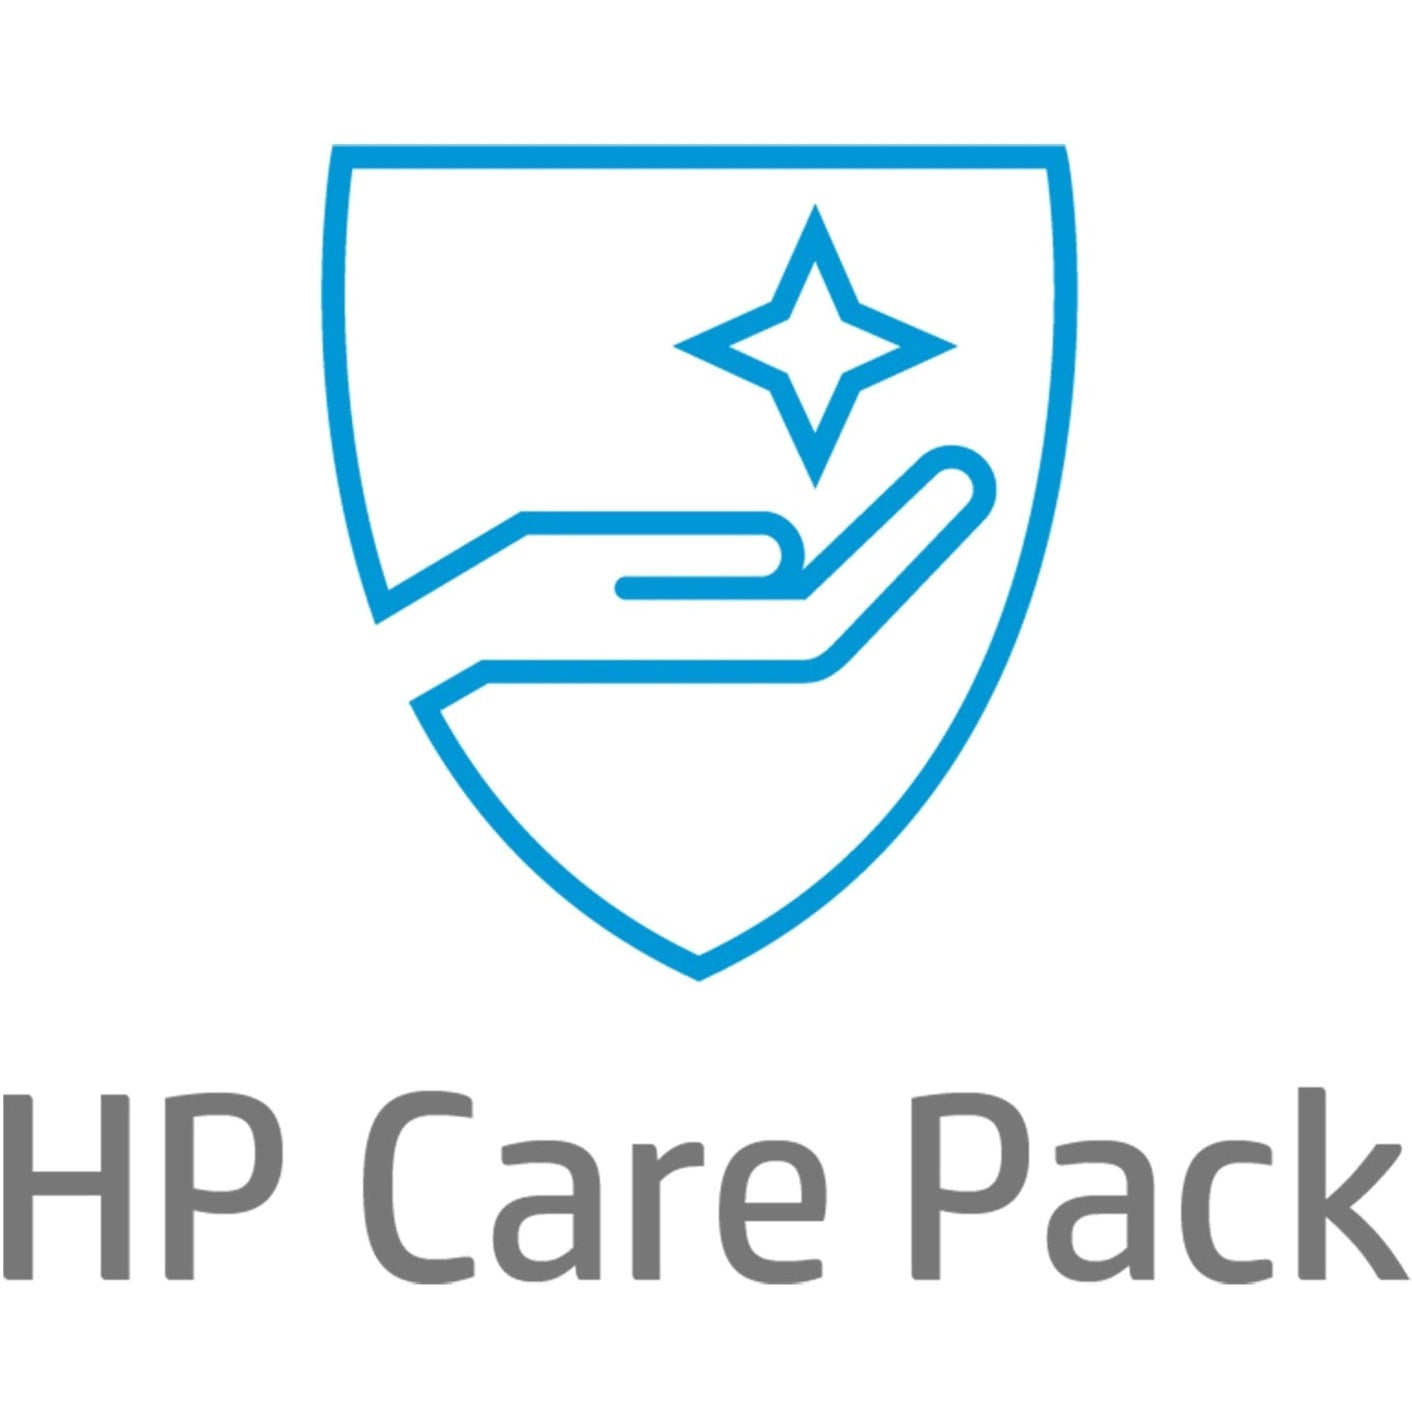 HP Care Pack Hardware Support with Defective Media Retention - 4 Year - Warranty (U9MU4E)